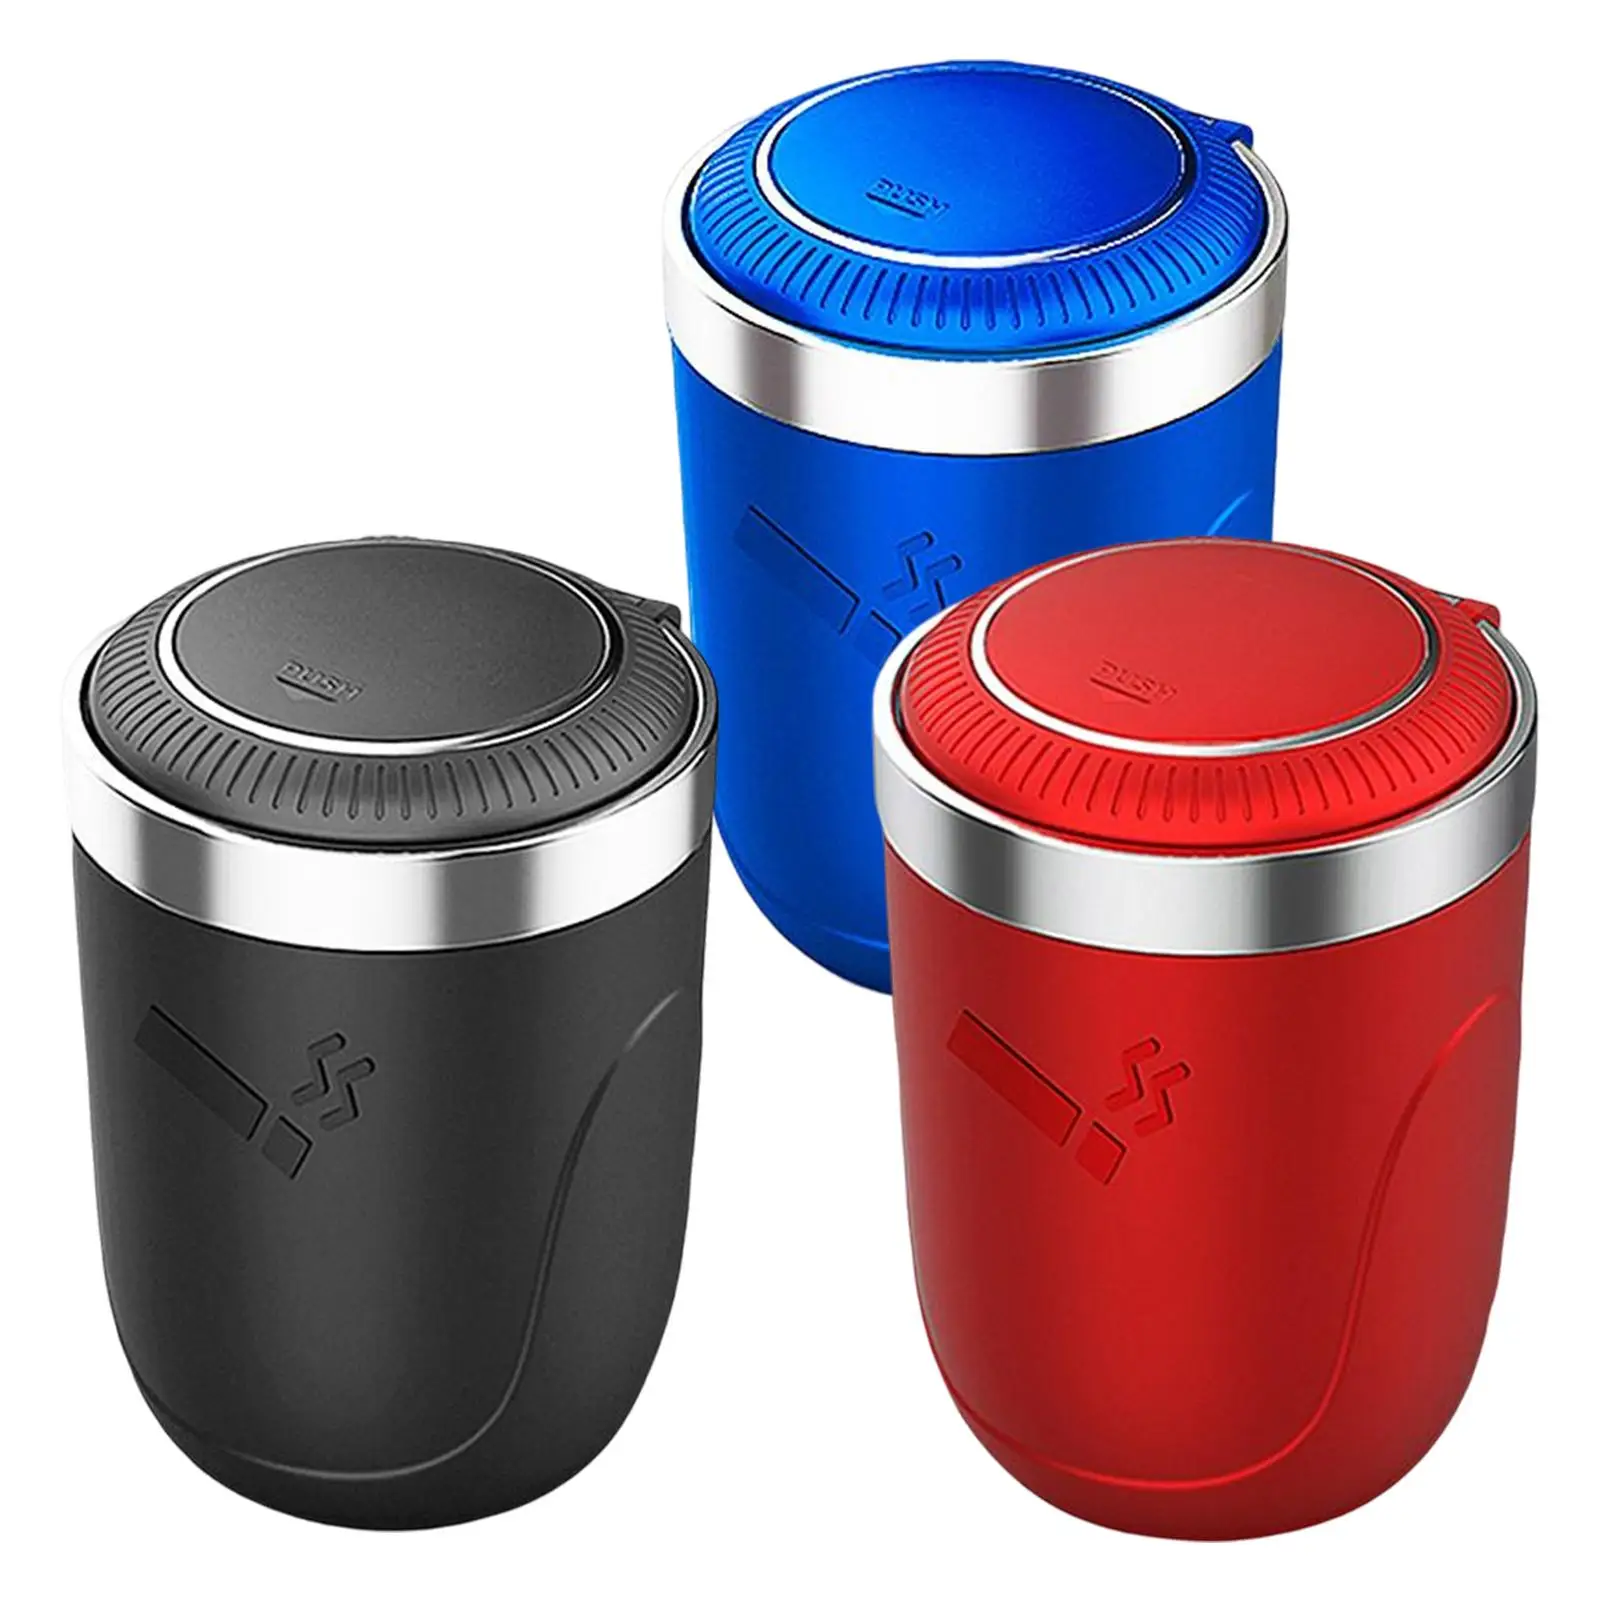 Car Ashtray with Lid Easy Clean up Detachable Smokeless Mini Ashtray Container Cigar Ash Bucket Ash Tray Fits for Office Travel